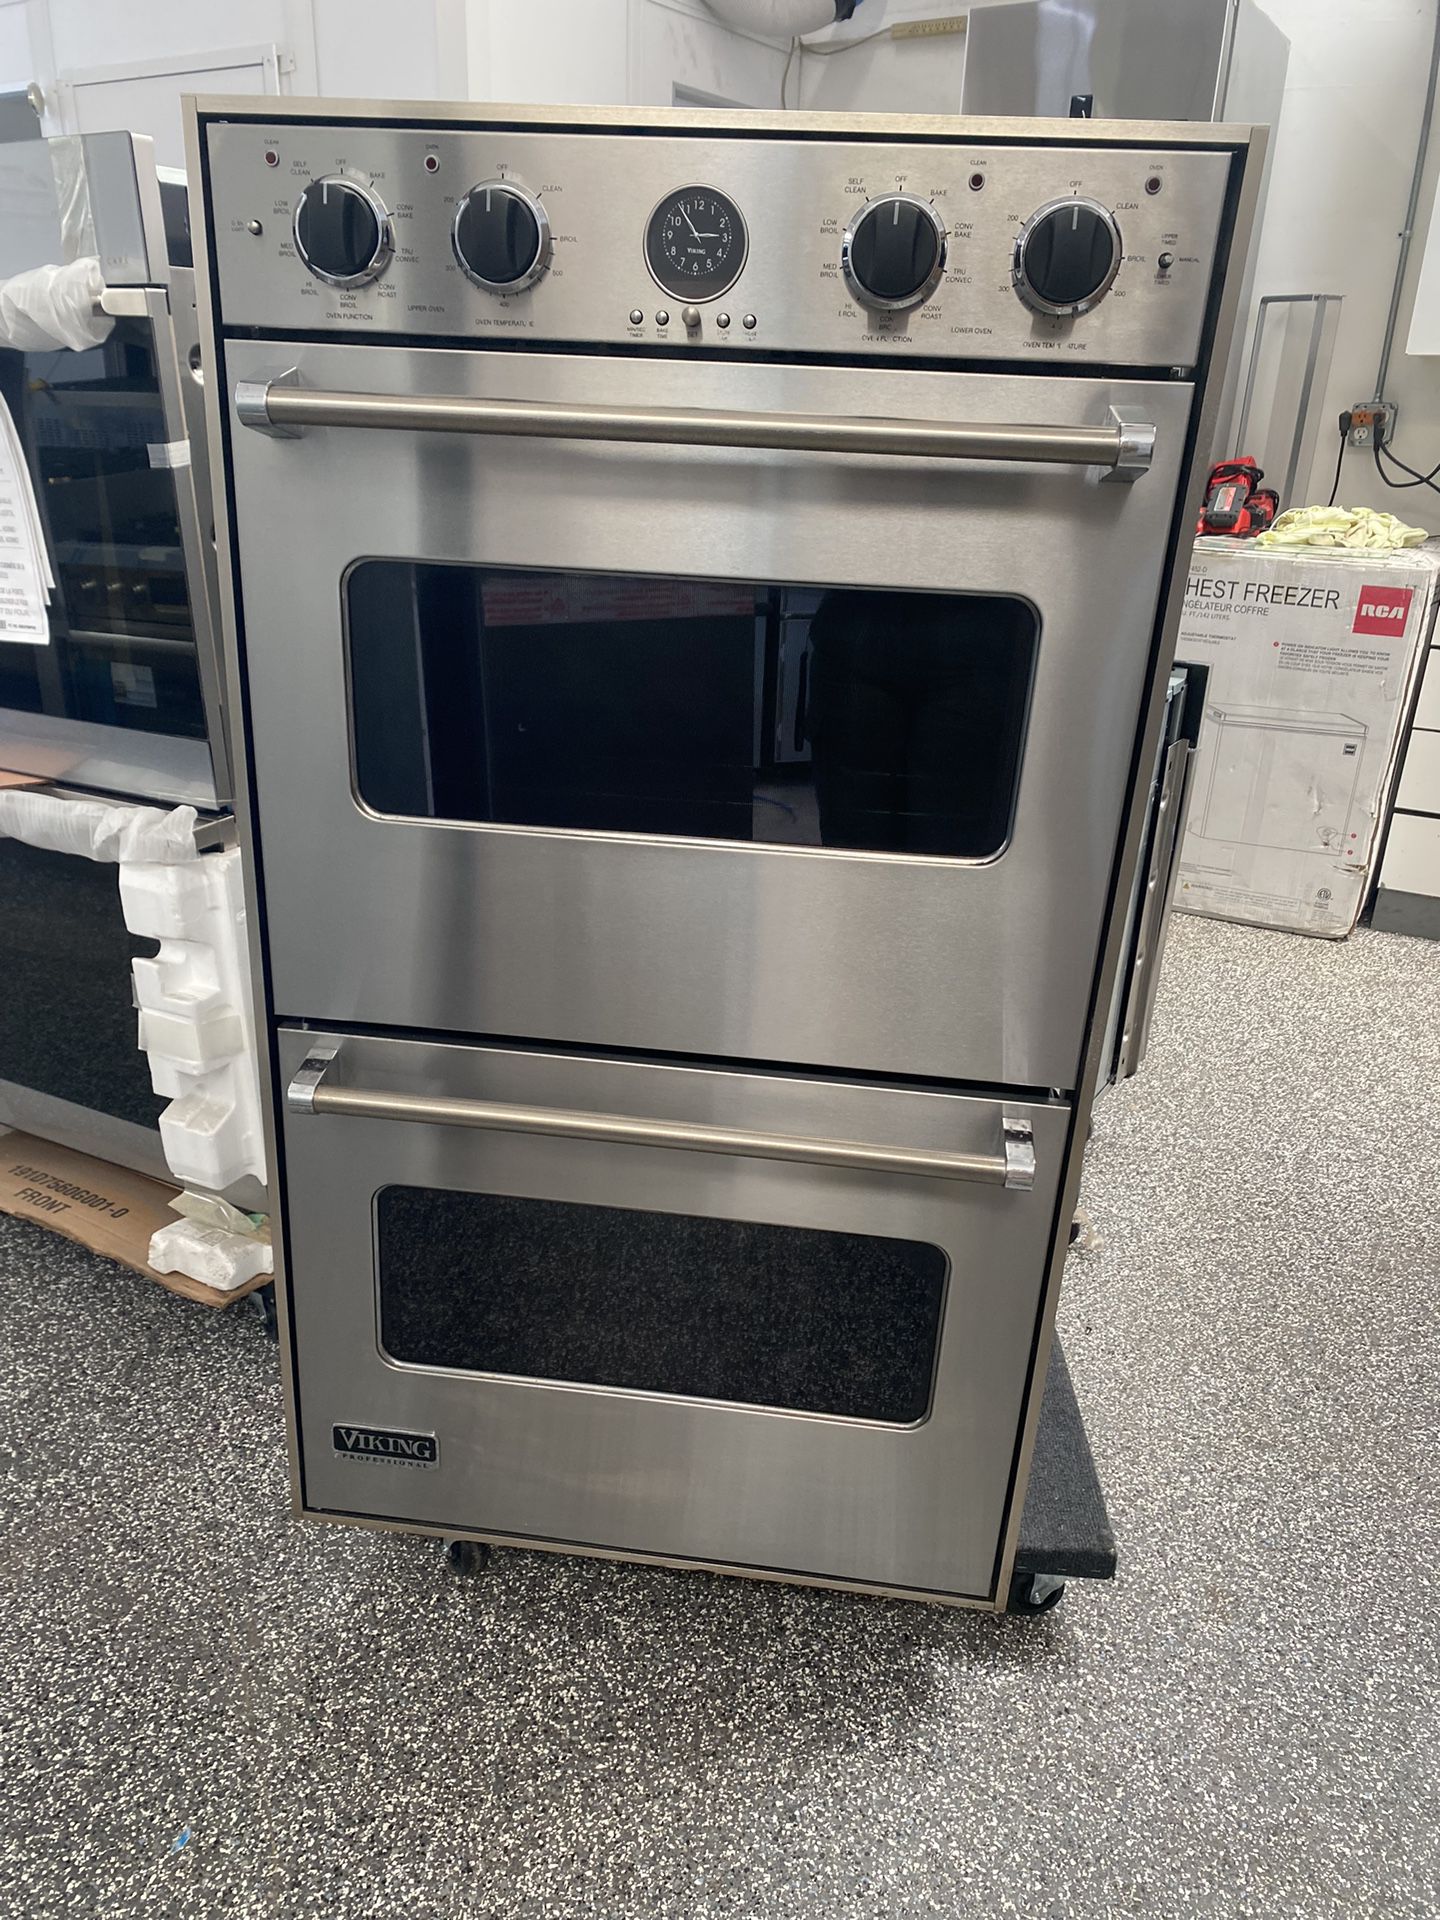 30” DOUBLE WALL OVEN VIKING PROFESSIONAL 